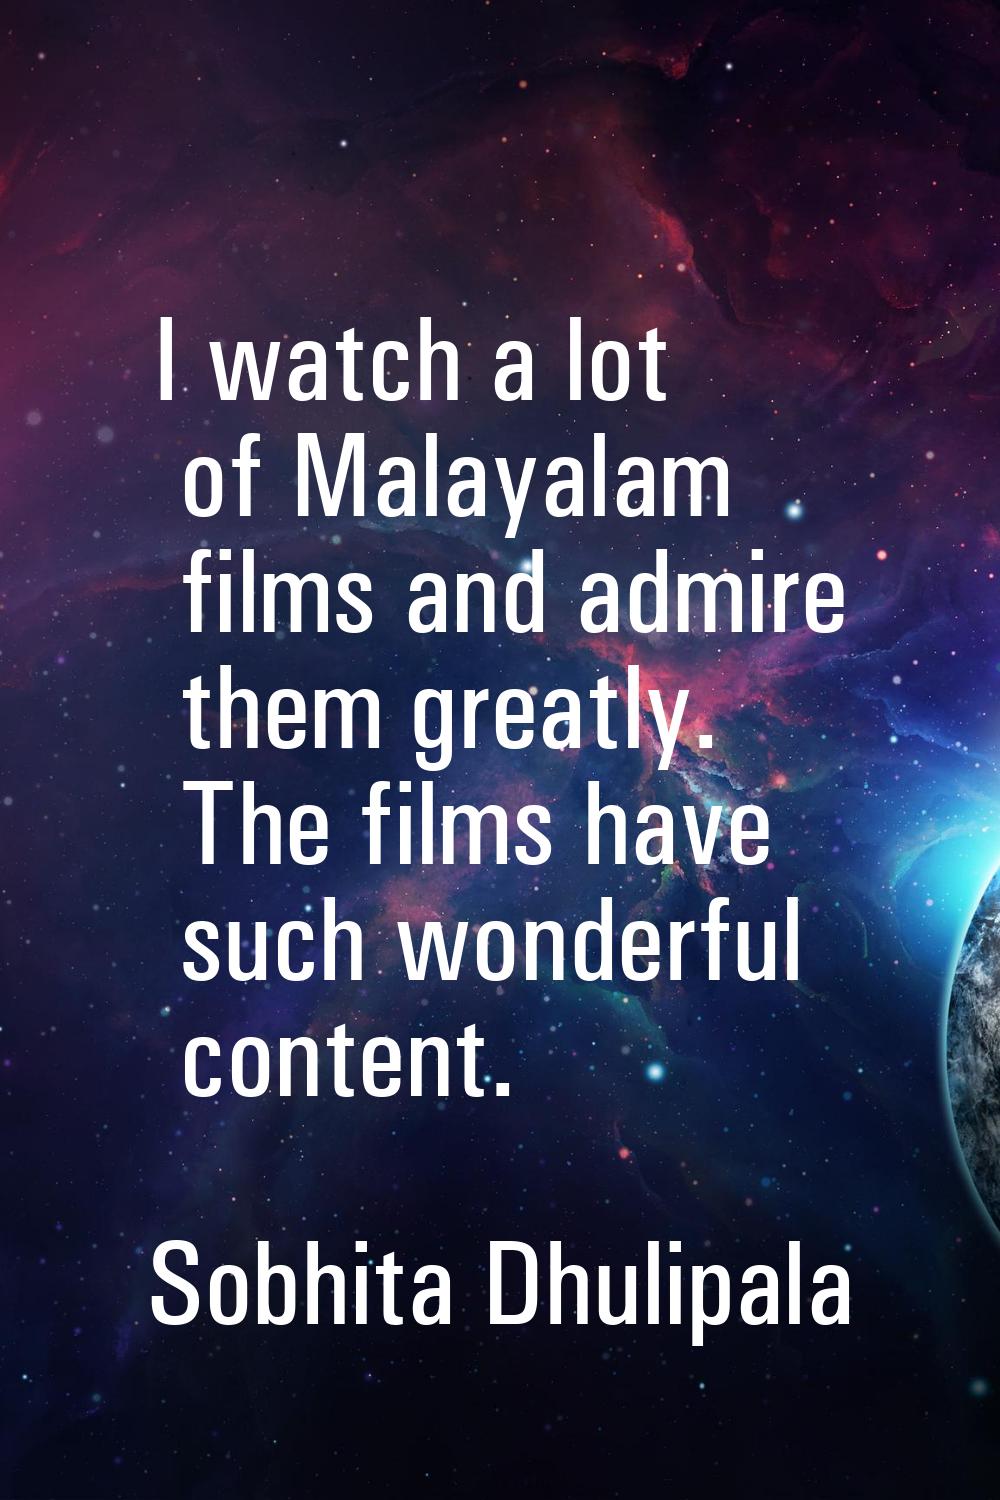 I watch a lot of Malayalam films and admire them greatly. The films have such wonderful content.